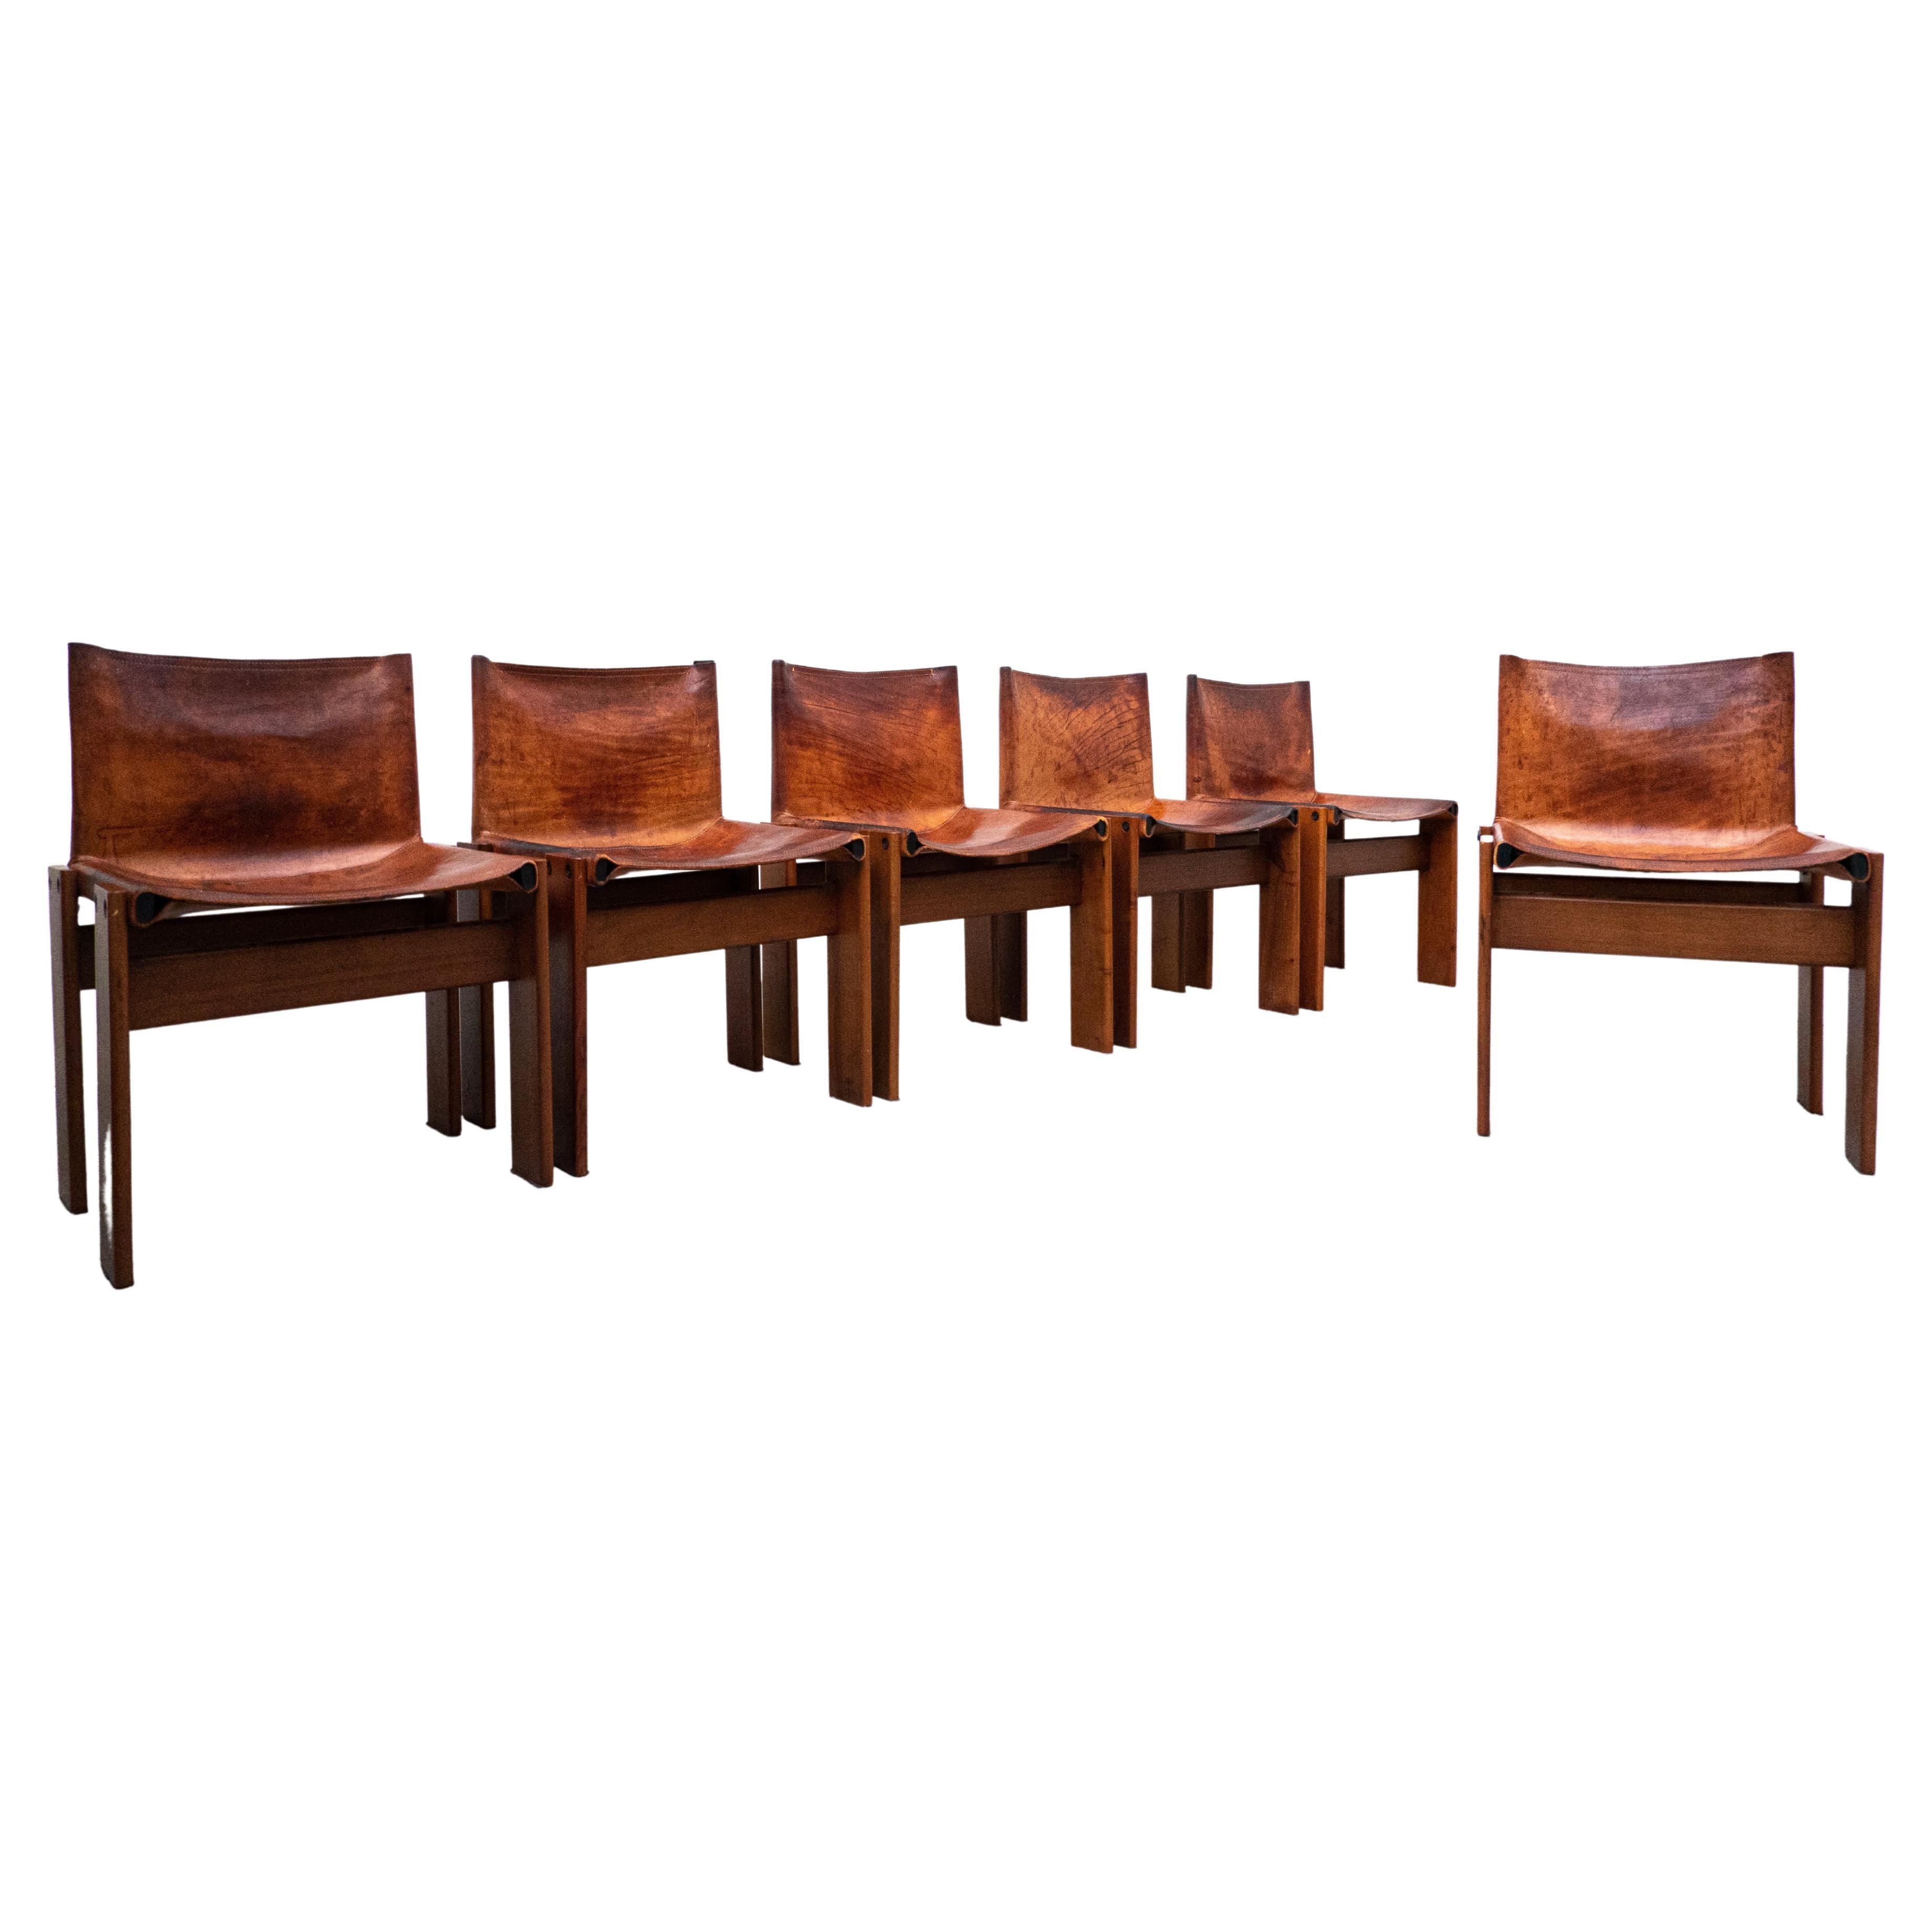 Set of Six "Monk" Chairs by Afra & Tobia Scarpa in Caramel Leather, 1970s, Italy